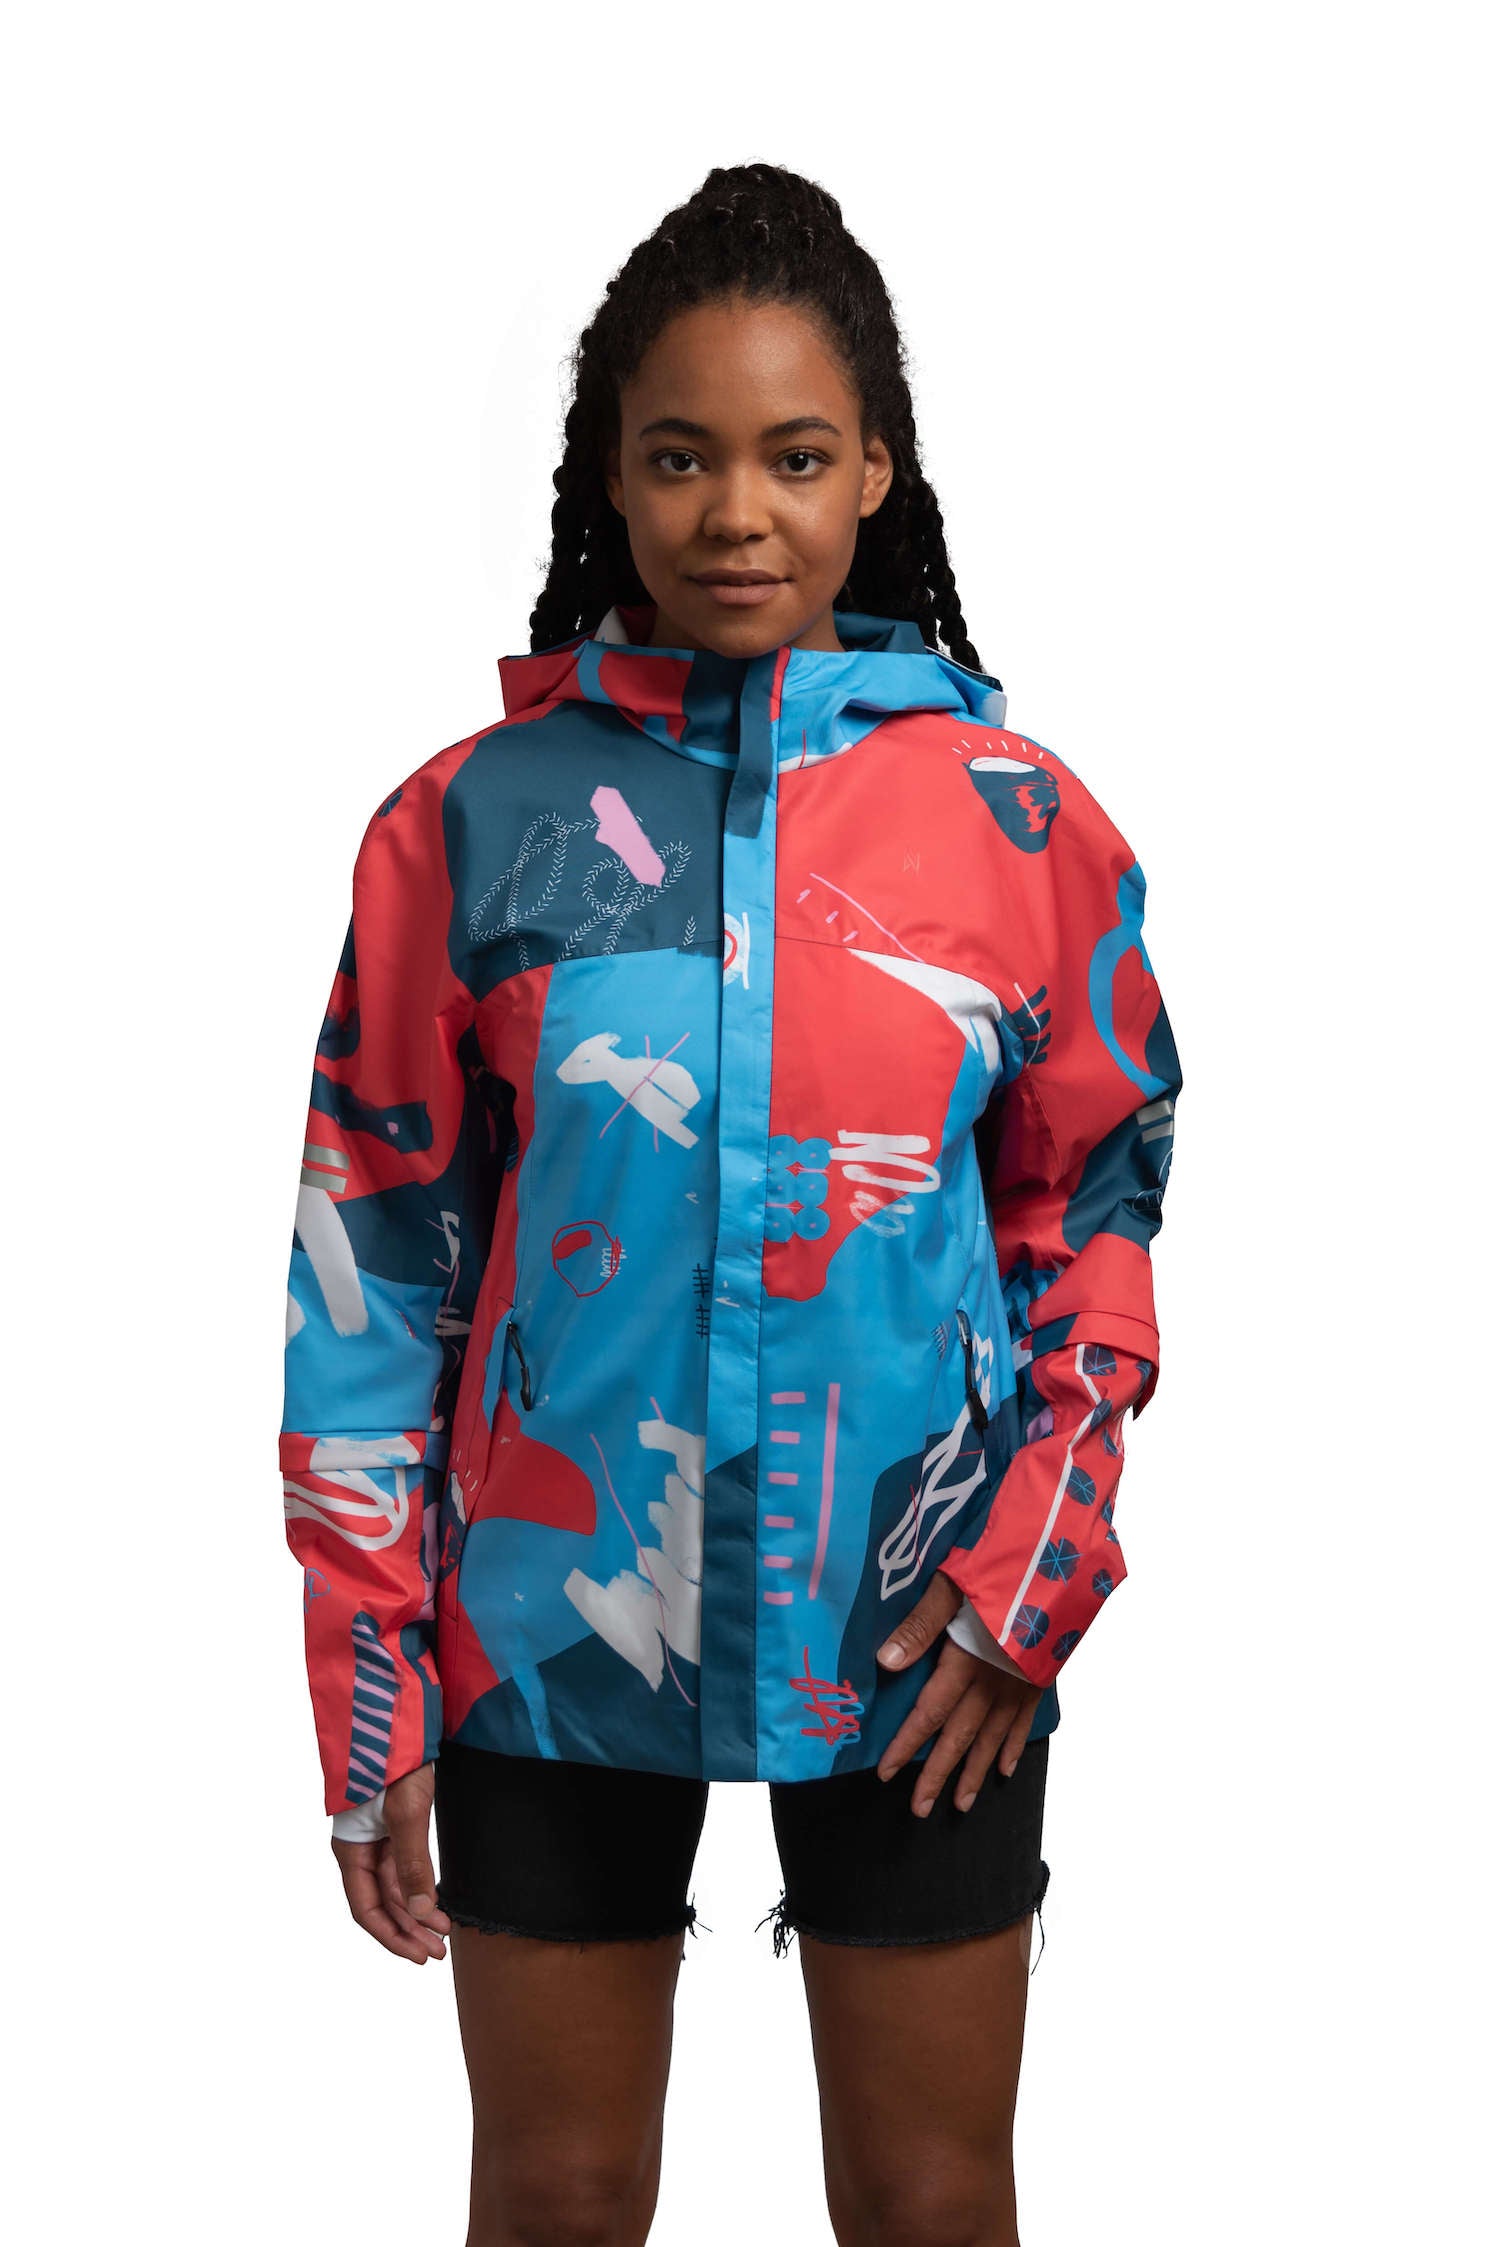 Warm Rain Jacket - The Cyclist - MONTREET - Bike Wear - Bicycle - Jacket - Eco friendly - Environmentally friendly - Unisex Jacket - Art Print - Red and Blue Graphic Print